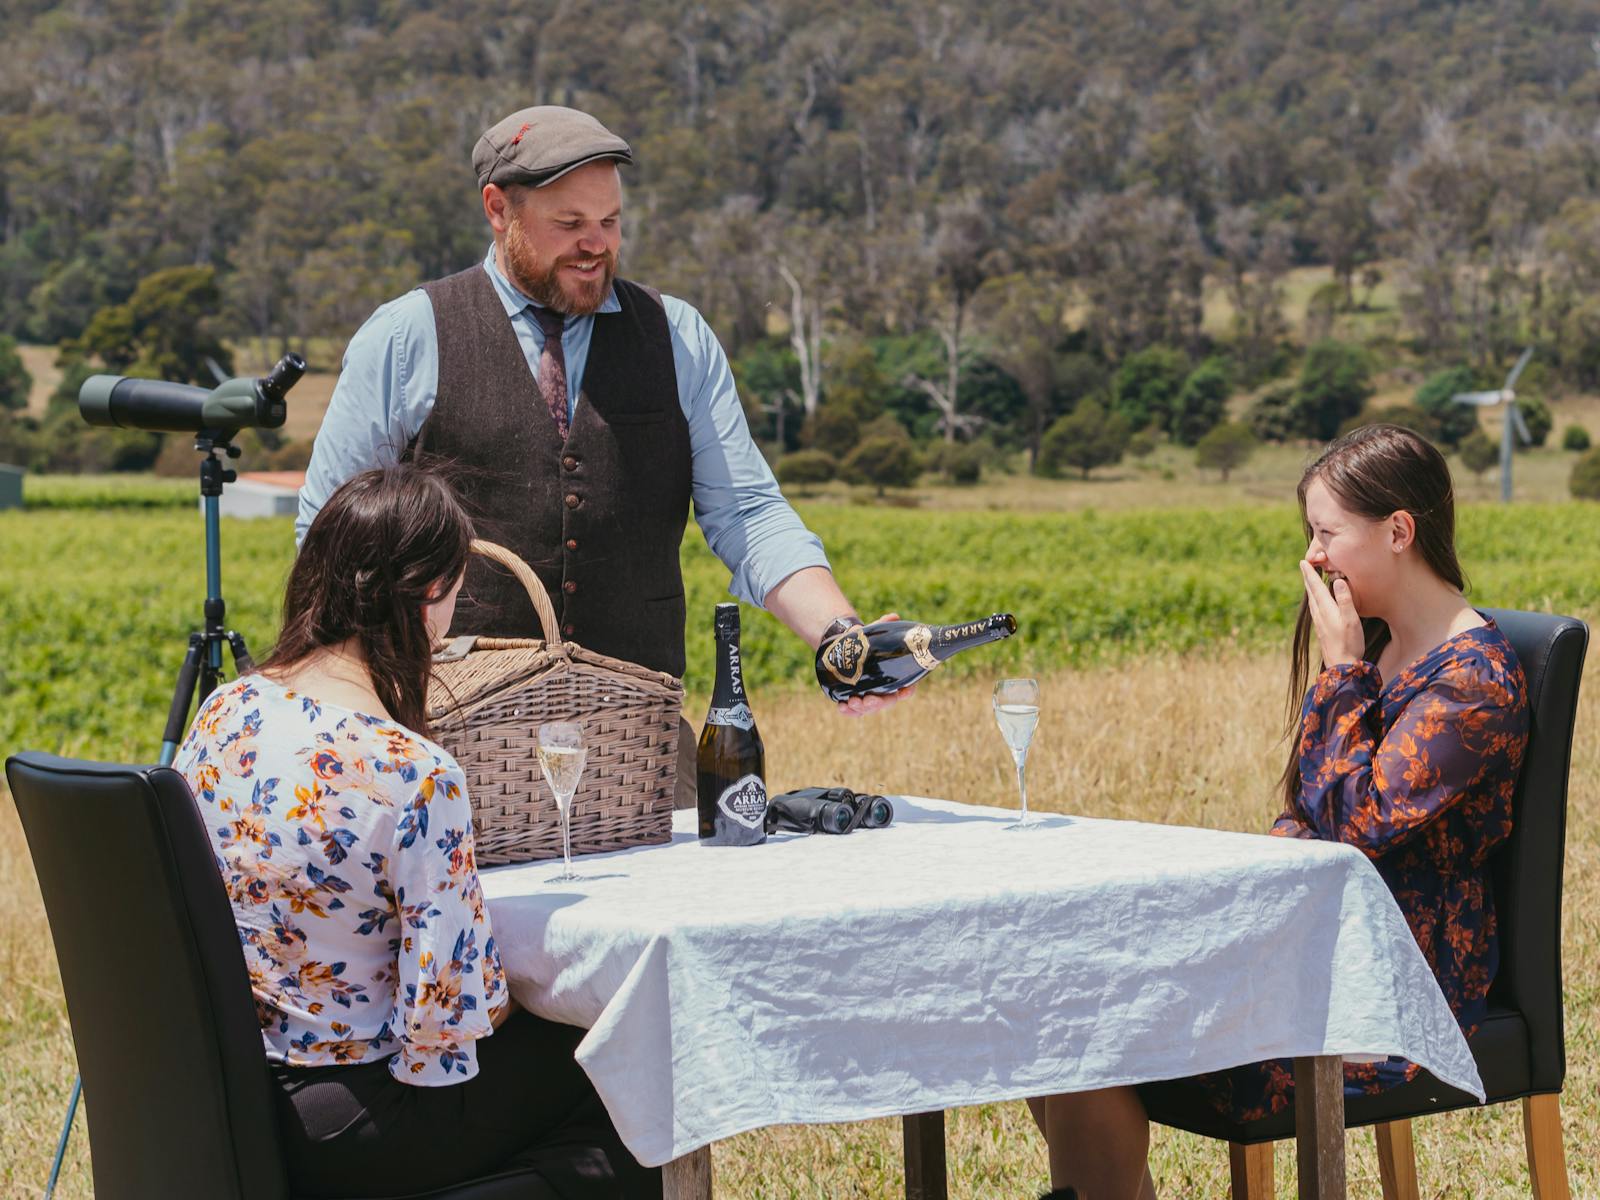 A guided tasting experience, accompanied by the Cellar Door Manager and Flinders the Dog.